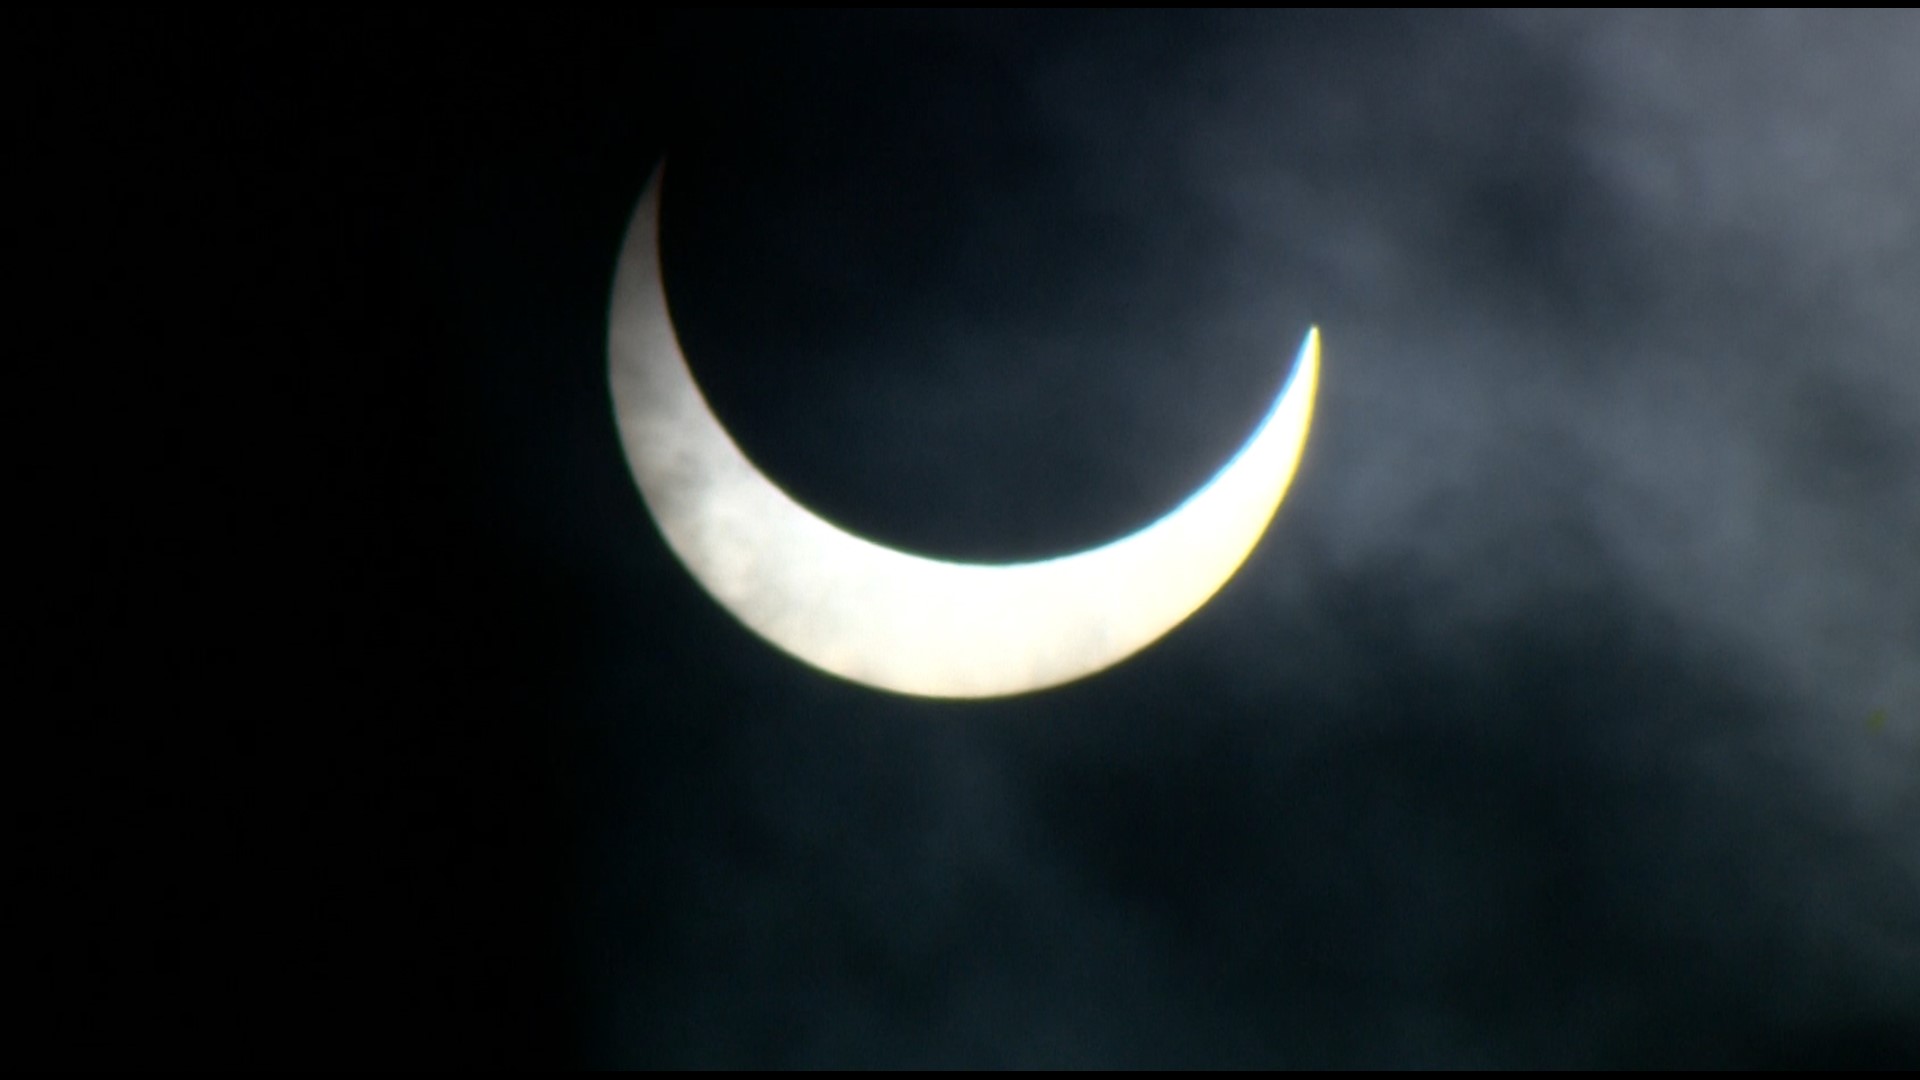 Get a close-up view of the annular eclipse across several hours in the San Antonio sky.